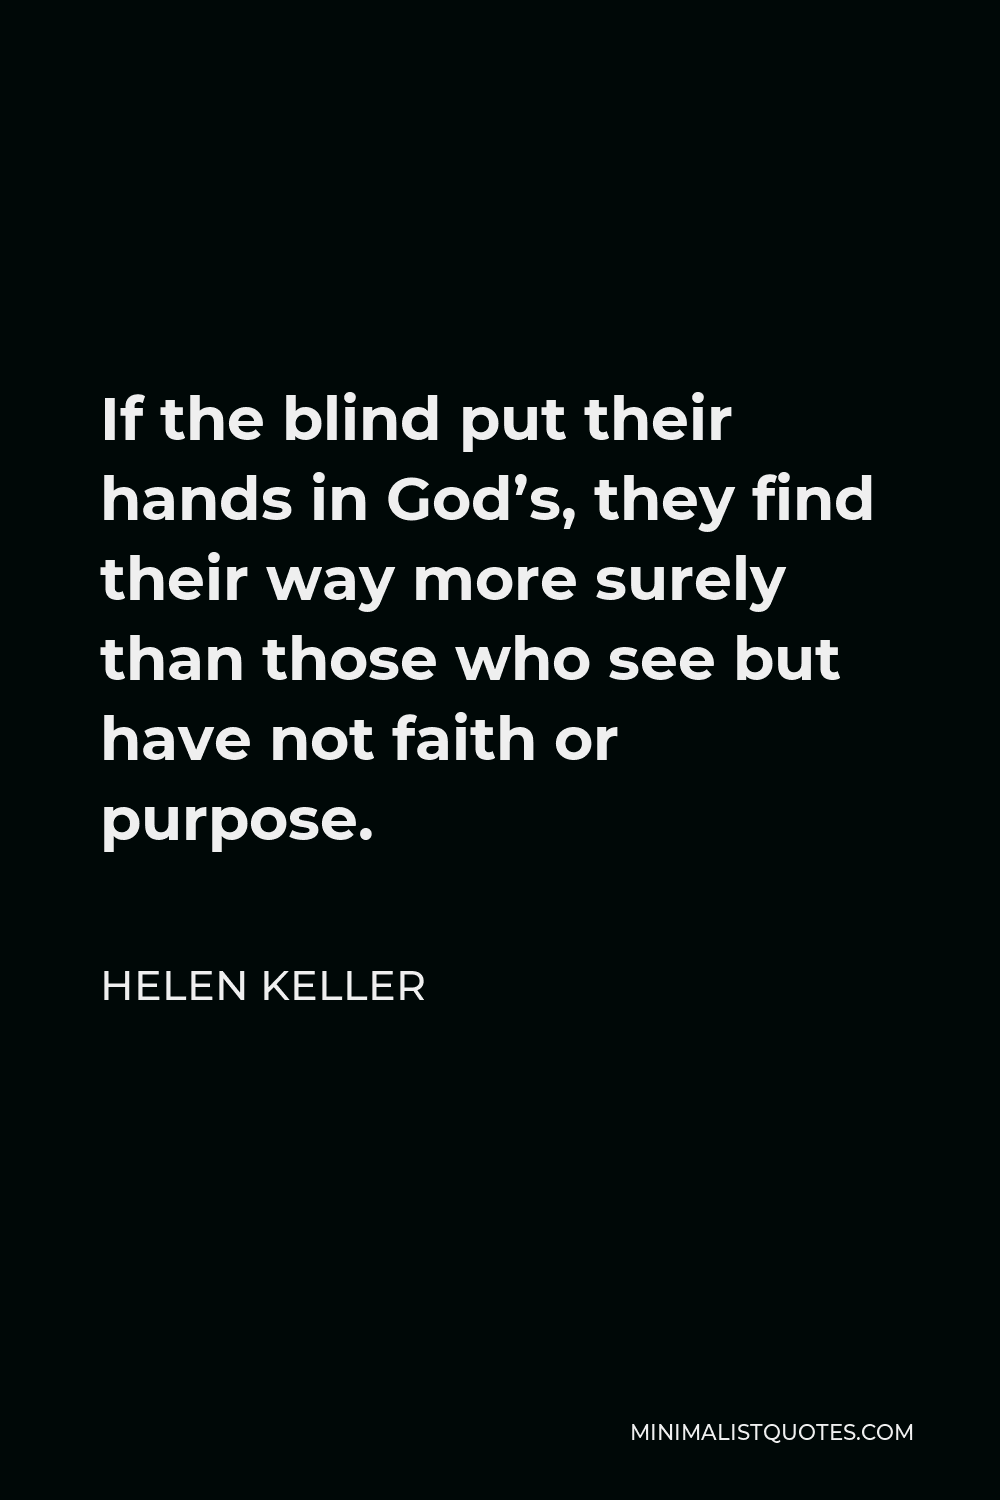 Helen Keller Quote - If the blind put their hands in God’s, they find their way more surely than those who see but have not faith or purpose.